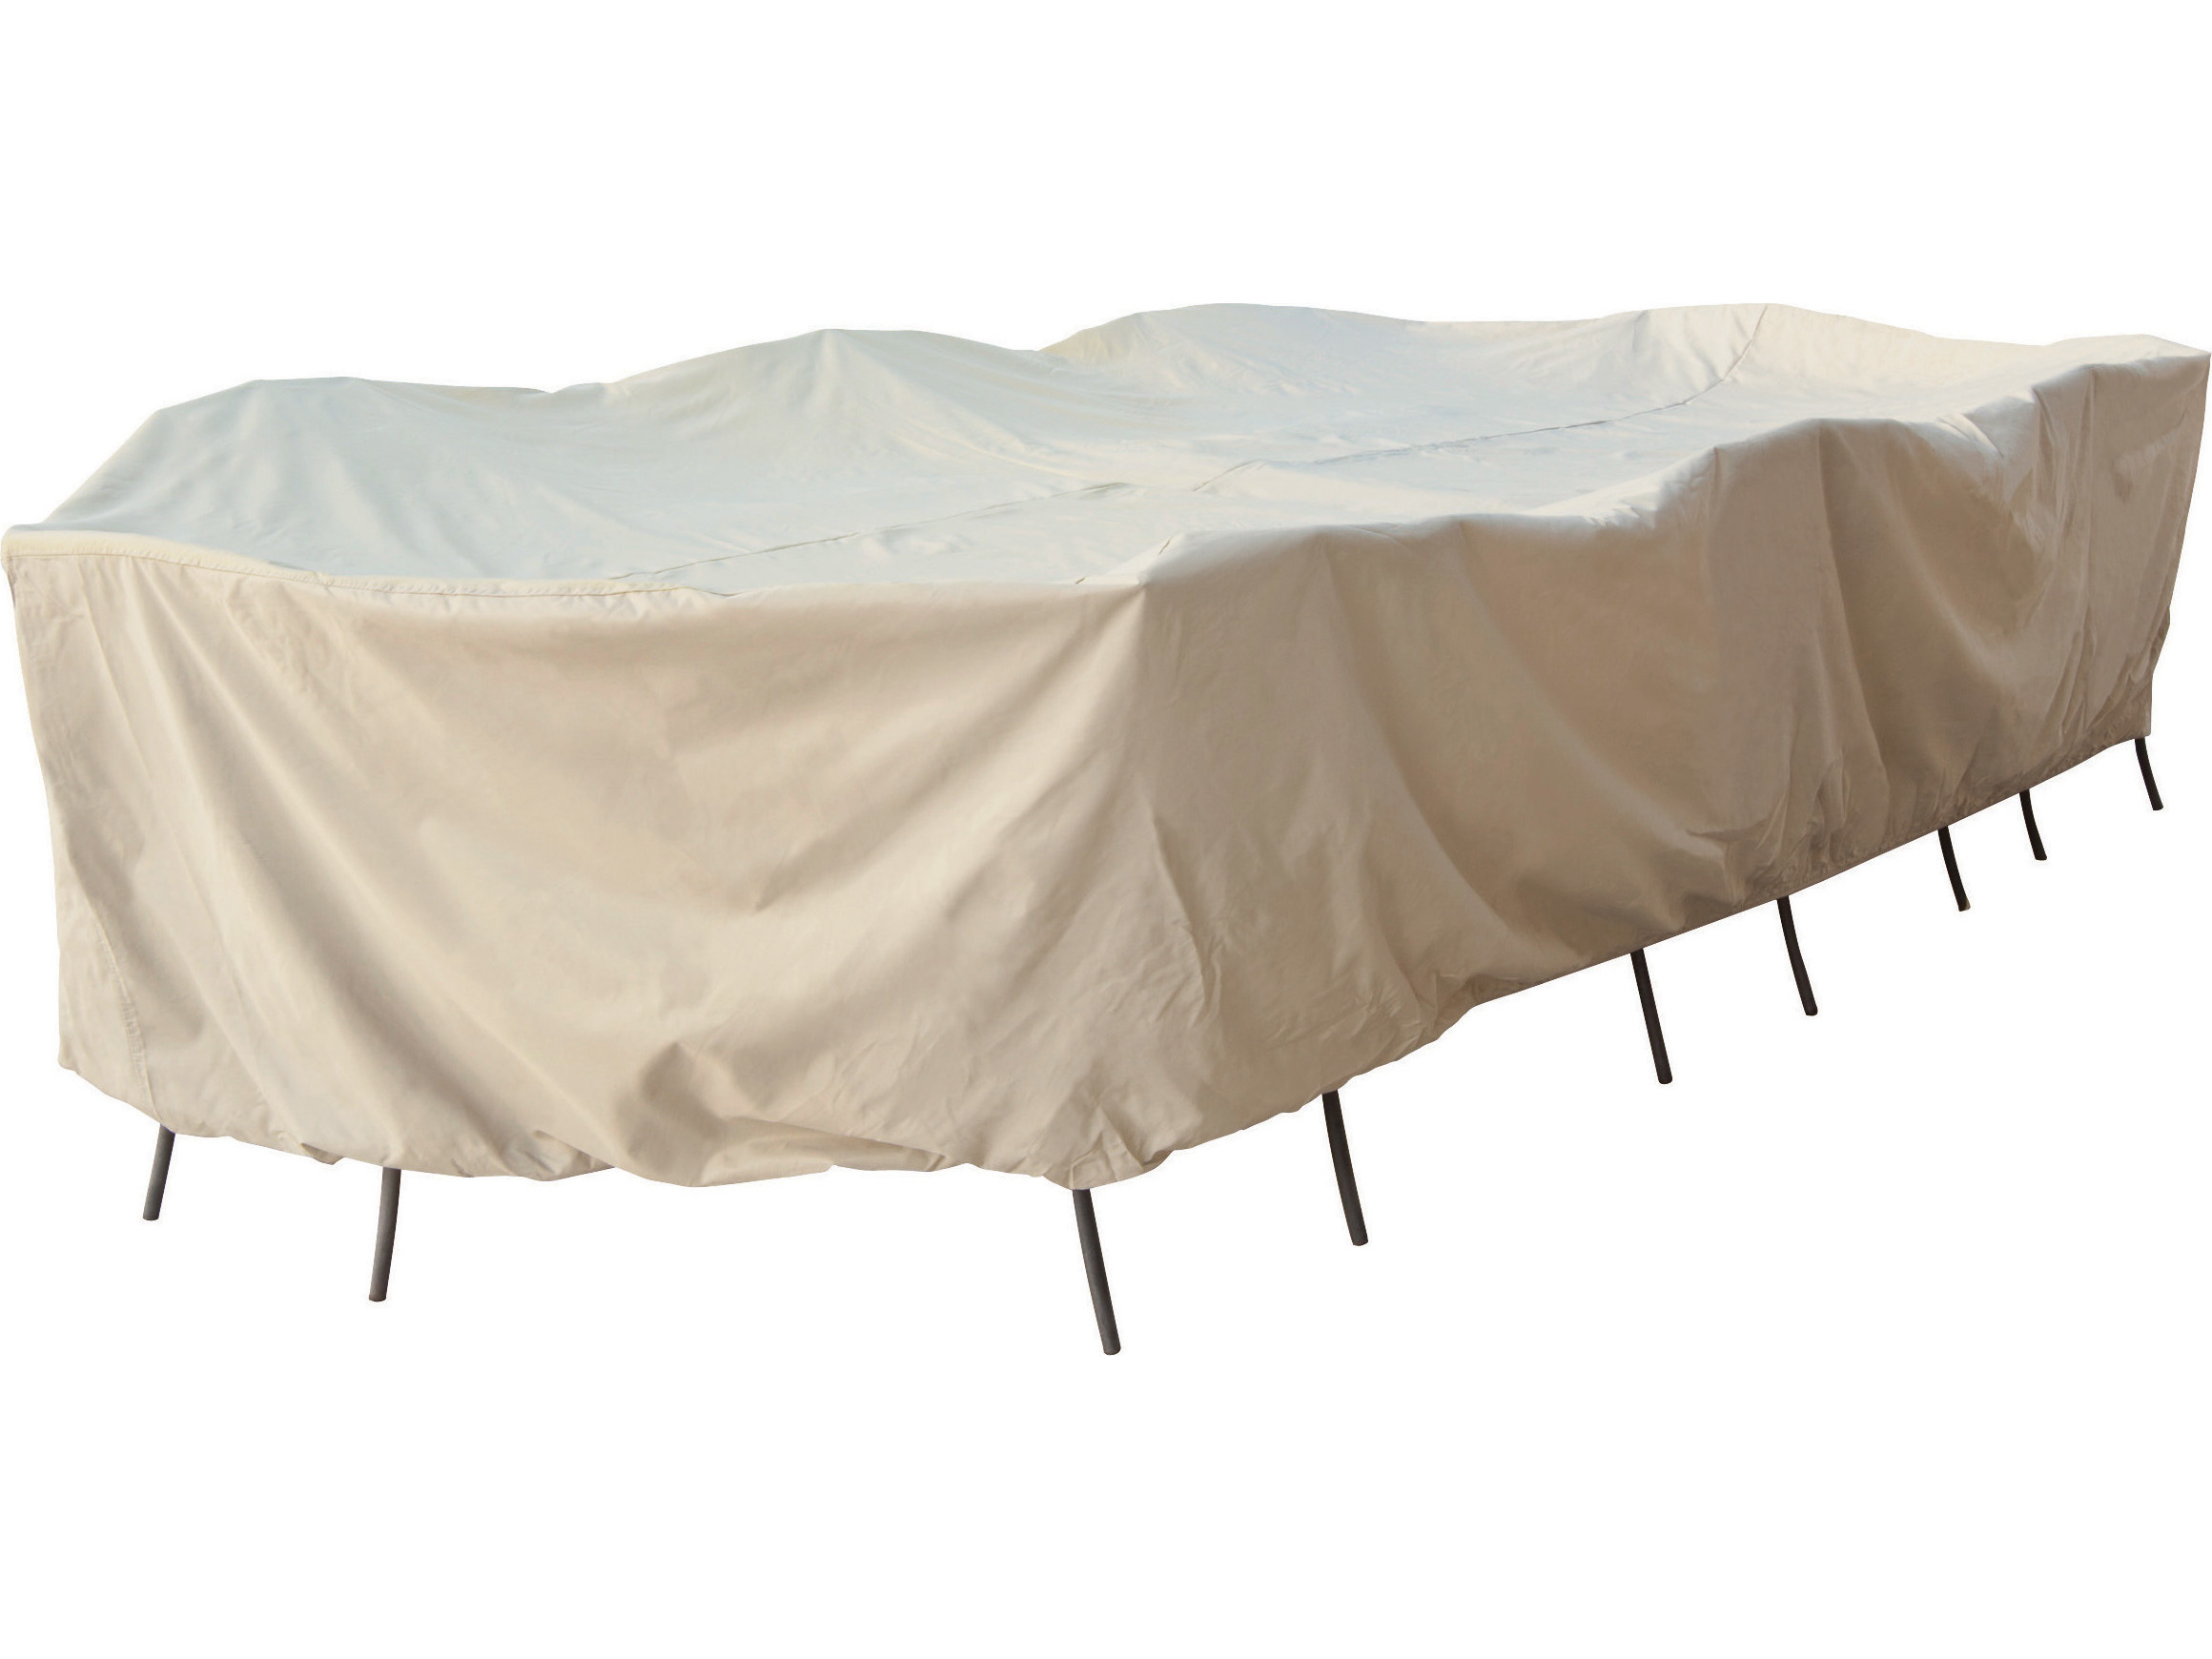 Treasure Garden 2xl Large Oval Rectangle Table And Chairs Cover throughout sizing 2320 X 1740